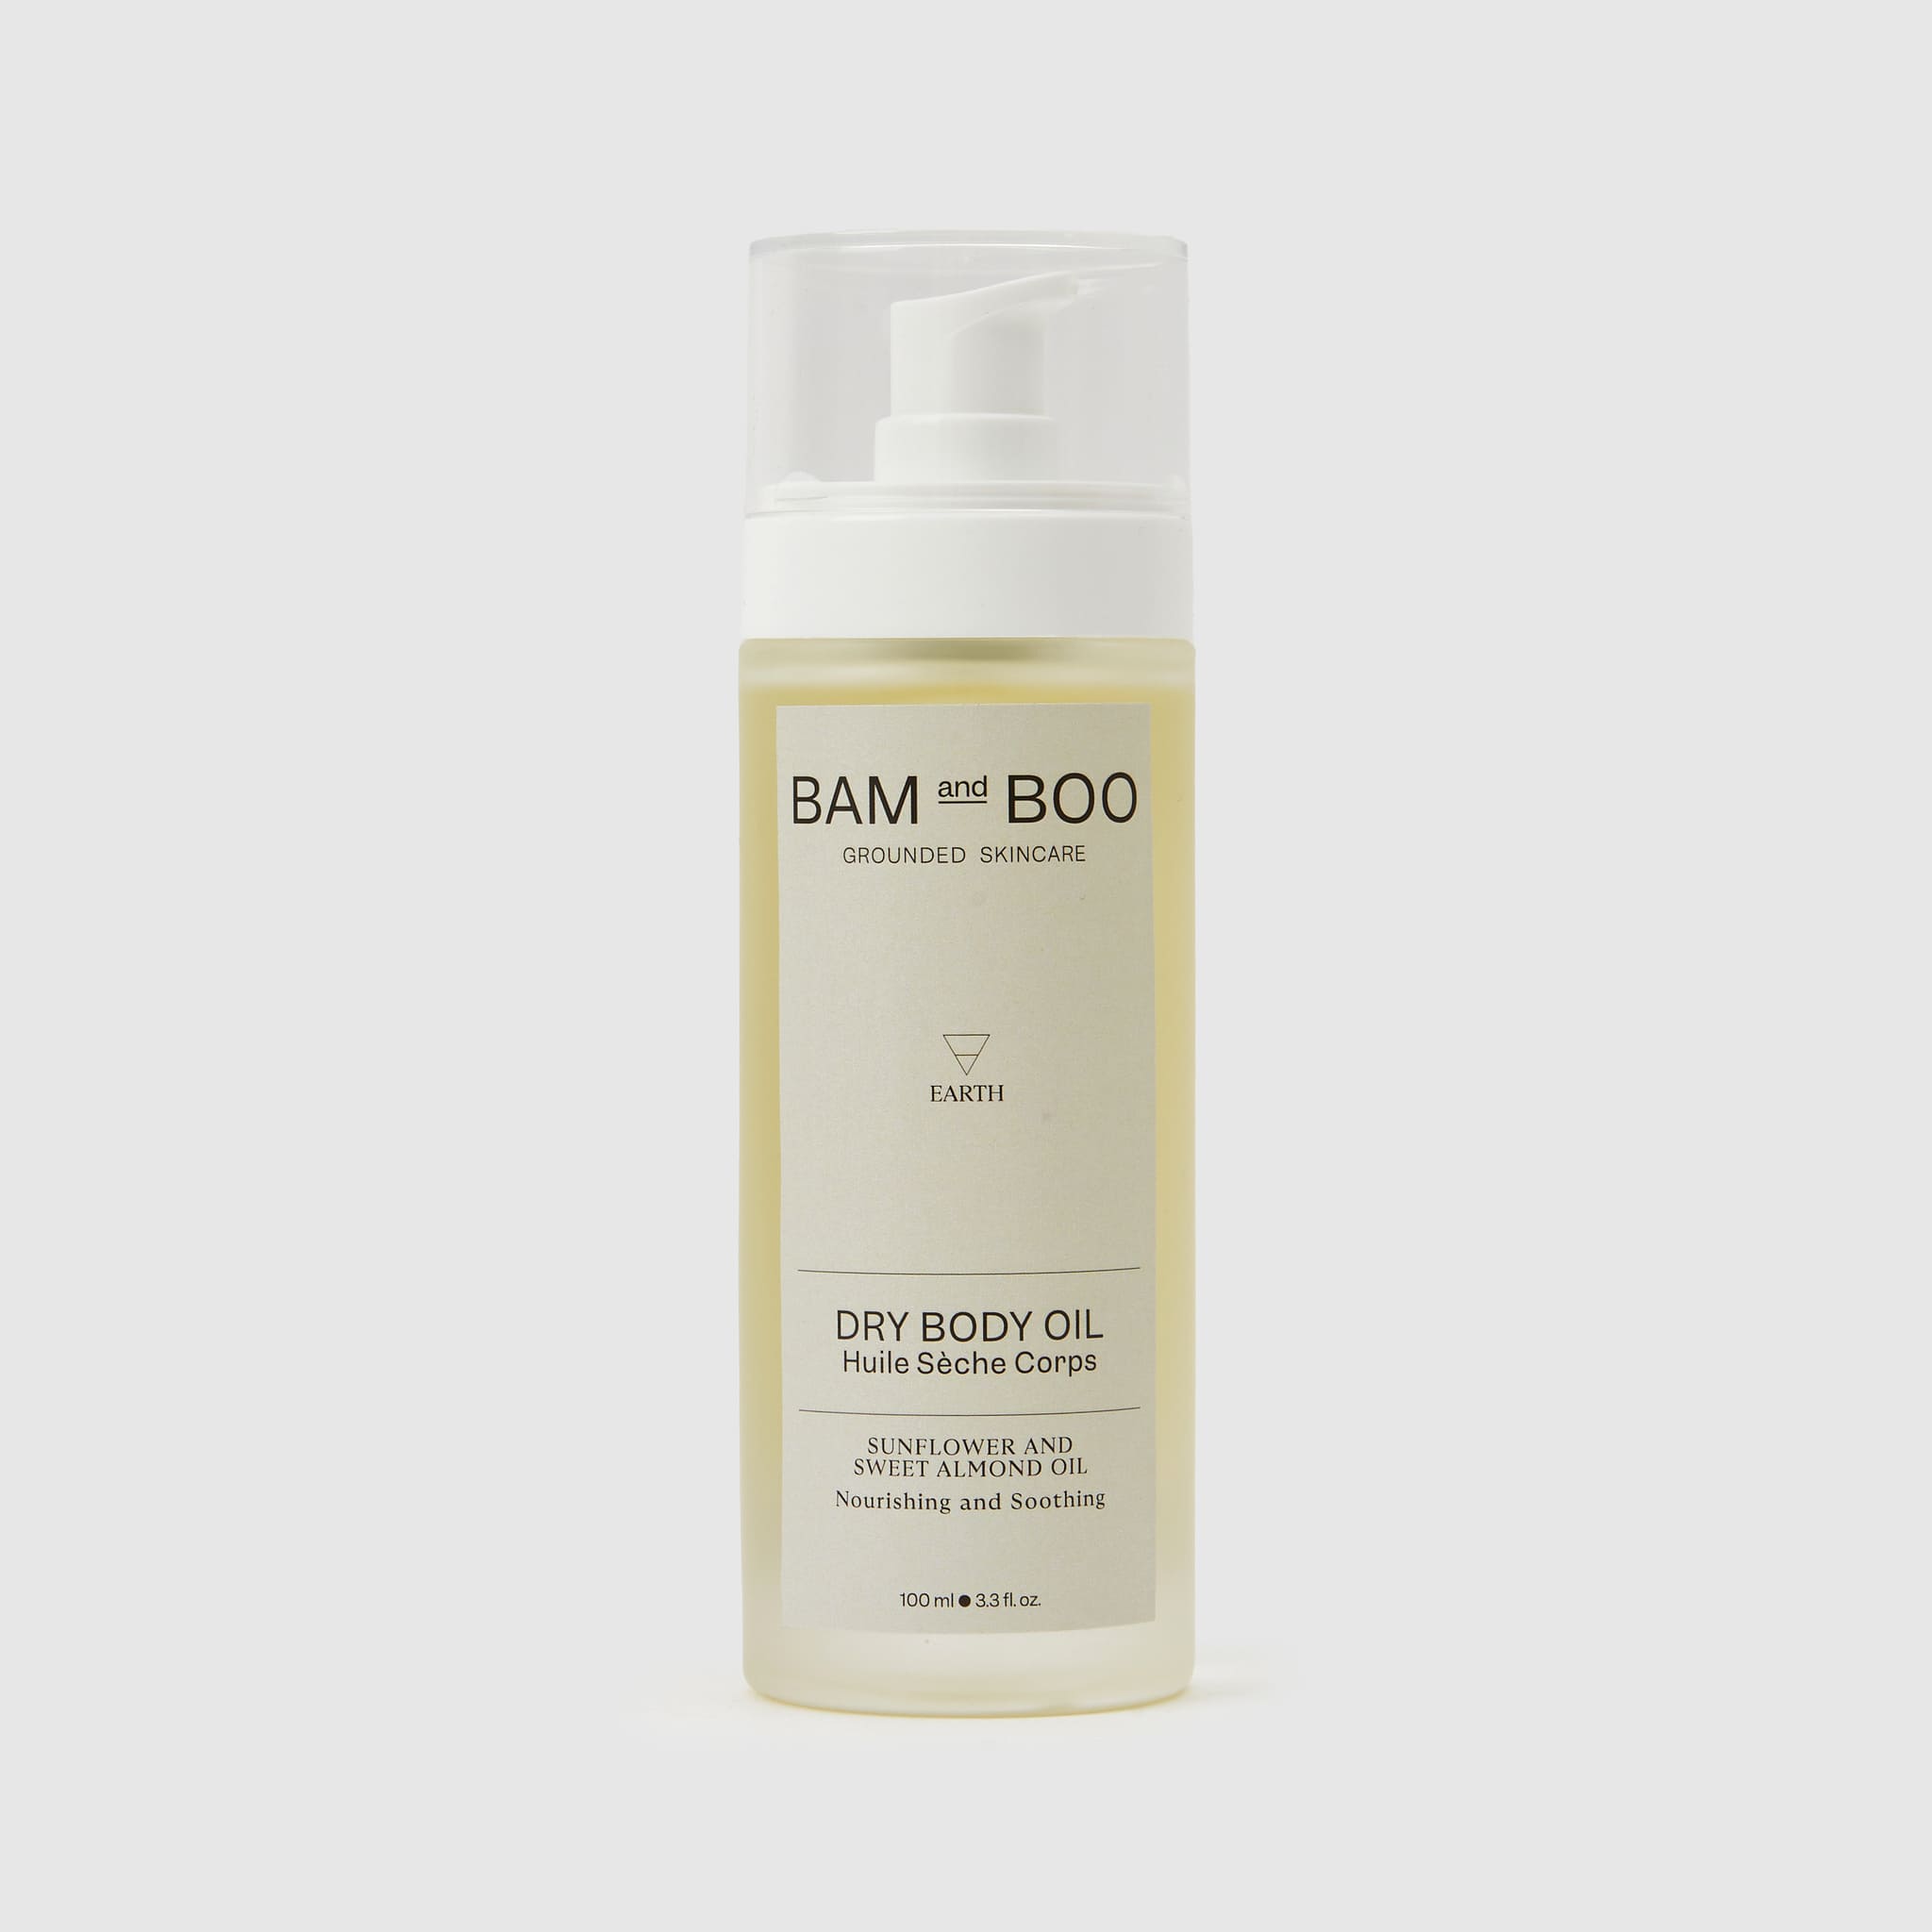 Dry Body Oil - Pack Shot Product Detail - BAMandBOO Grounded Skincare Azores